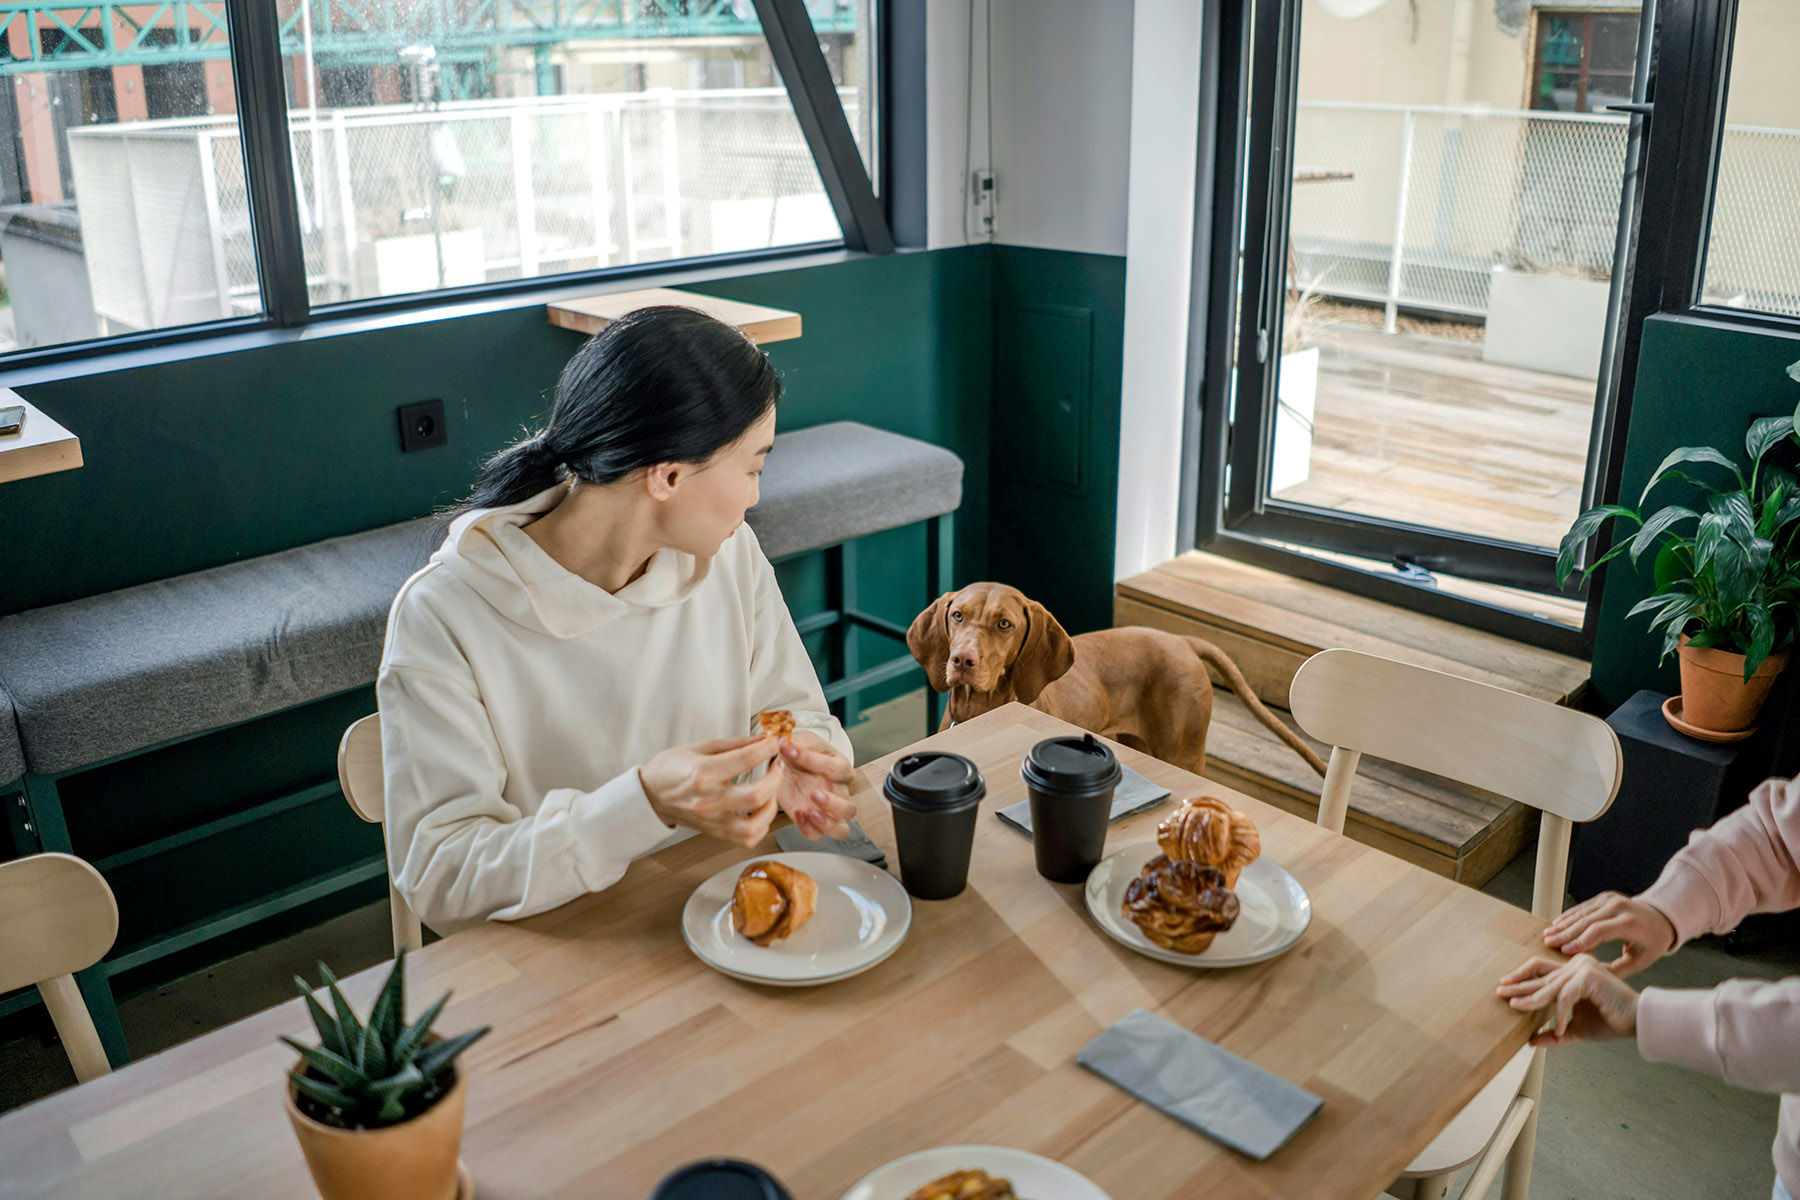 Dog begging their owner for a piece of her breakfast. She's sitting at the table, eating a pastry and looking at the dog. 